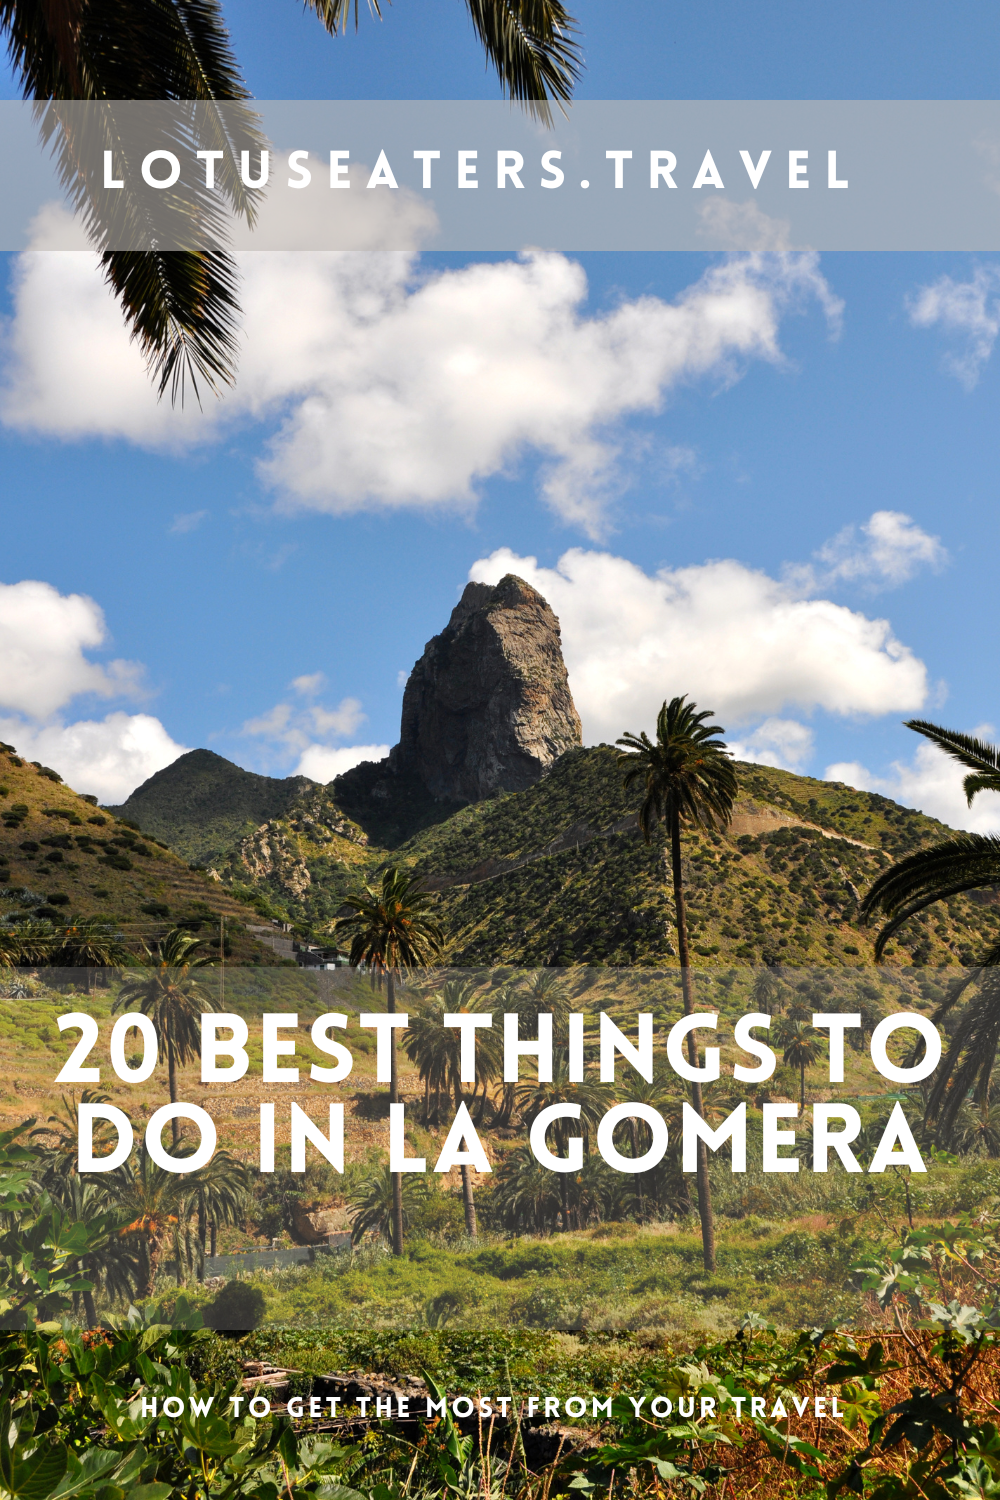 20 Best things to do in La Gomera: A guide to the paradise island